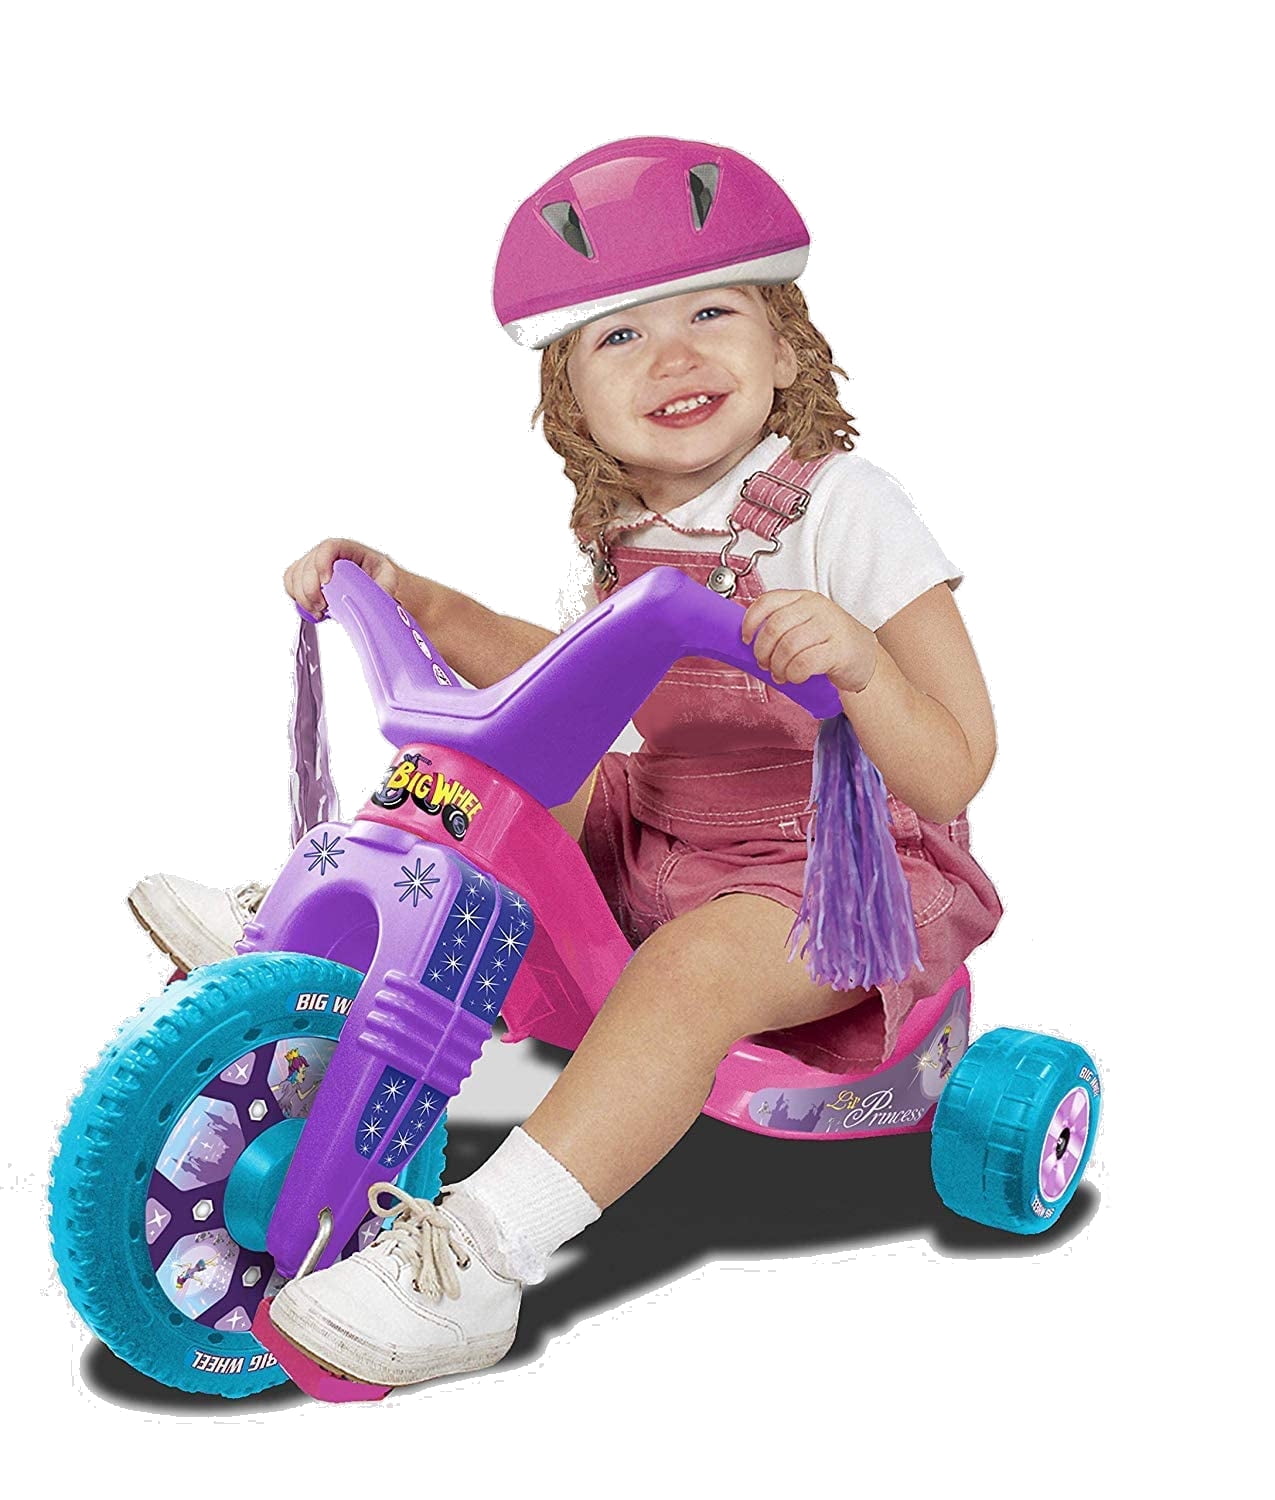 Cruiser Ride-on Toy 8.5 Inch Durable Wheel Perfect Gift Big Wheel 50th Anniversary Princess Junior Trike Girls Toys Indoor/Outdoor Toys Big Wheel Tricycle for Toddlers 